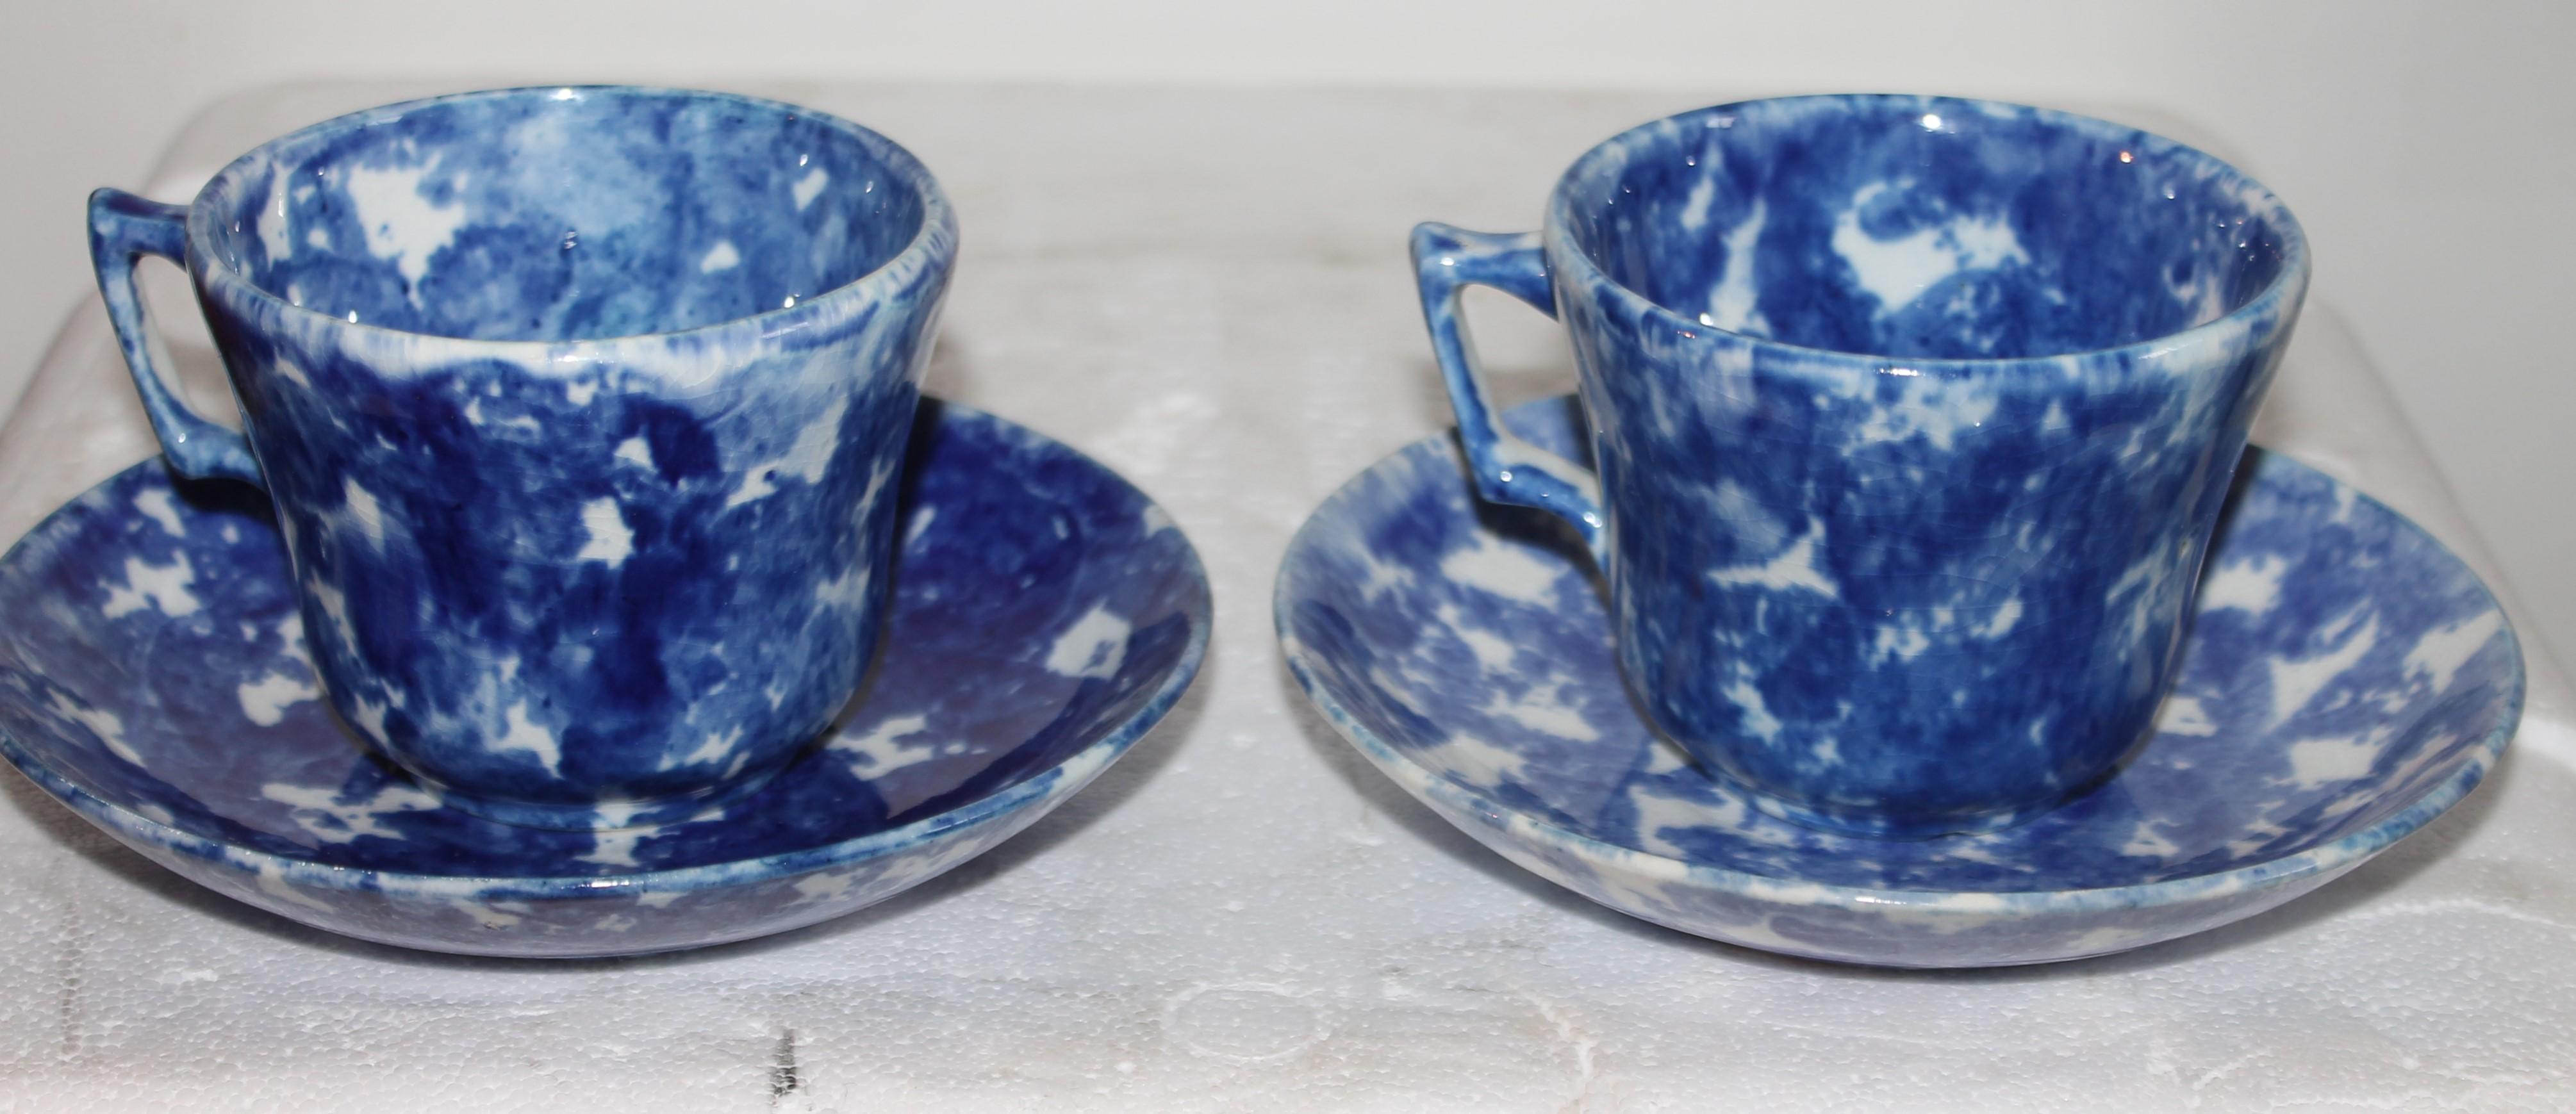 North American 19thc Sponge Ware Cup and Saucers, Set of Four For Sale